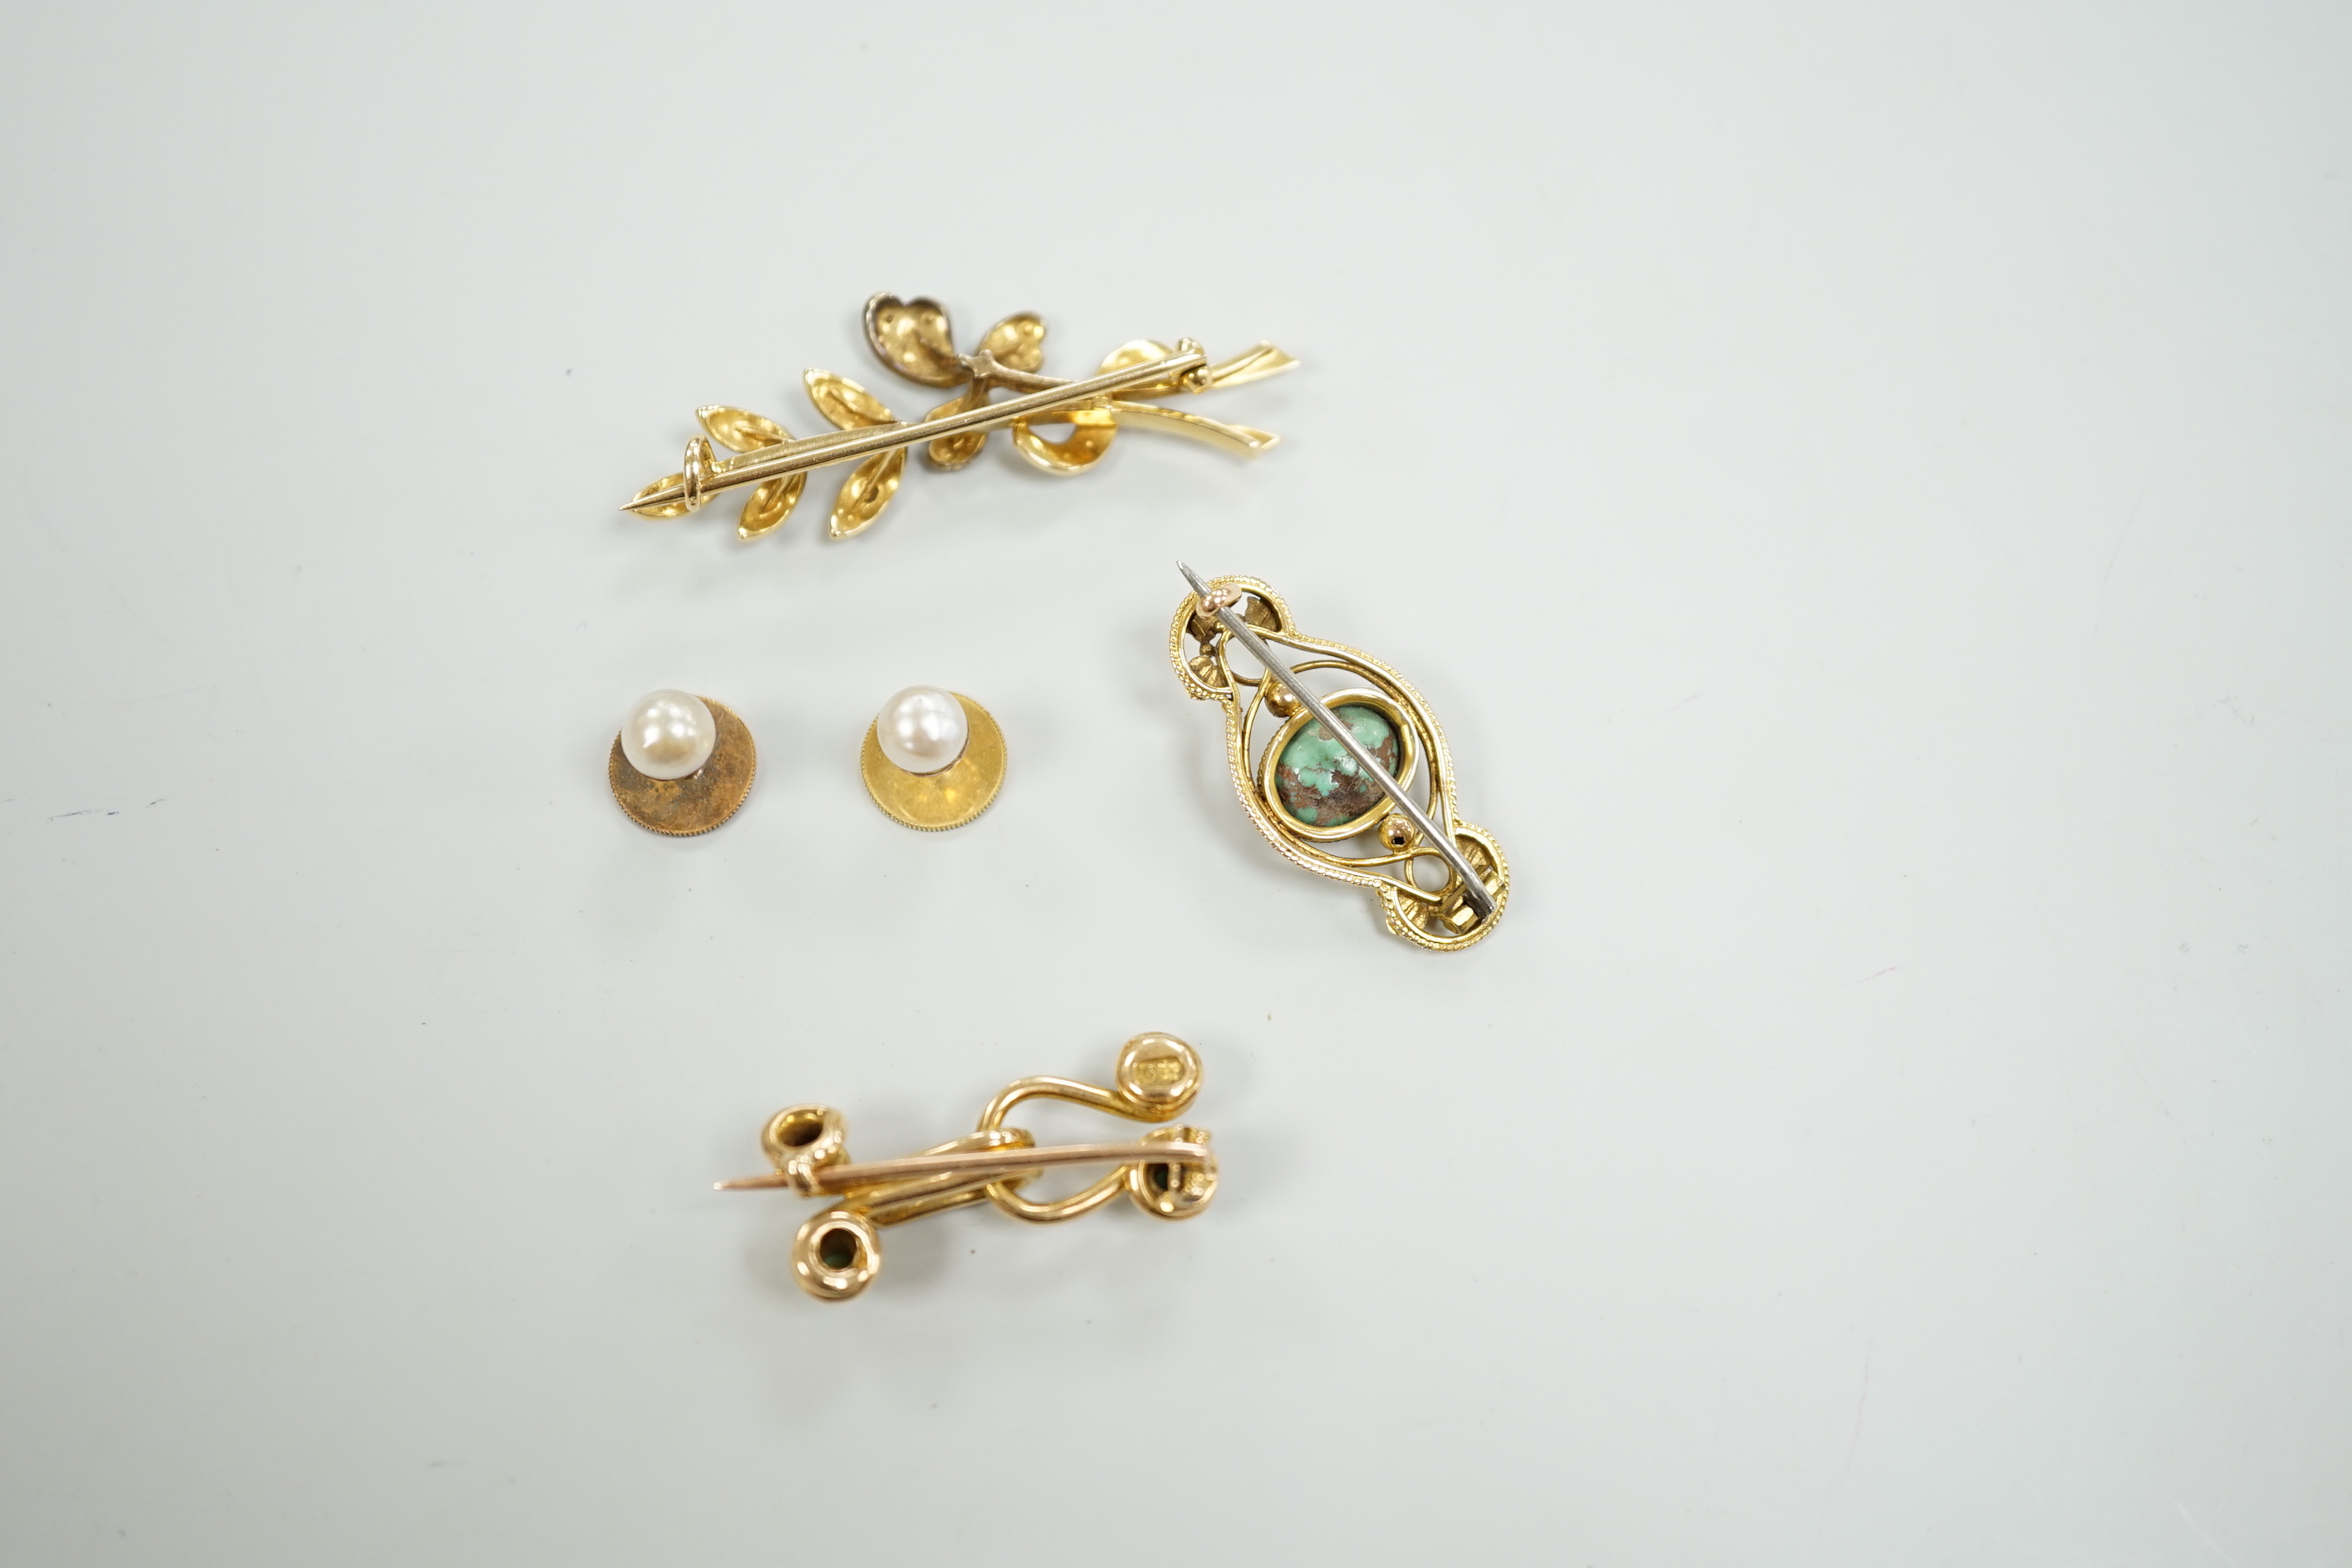 An Edwardian 15ct and seed pearl cluster set spray brooch, 47mm, a 15ct and four stone turquoise set brooch, one other yellow meta and turquoise brooch and a pair of 9ct and cultured pearl set dress studs.